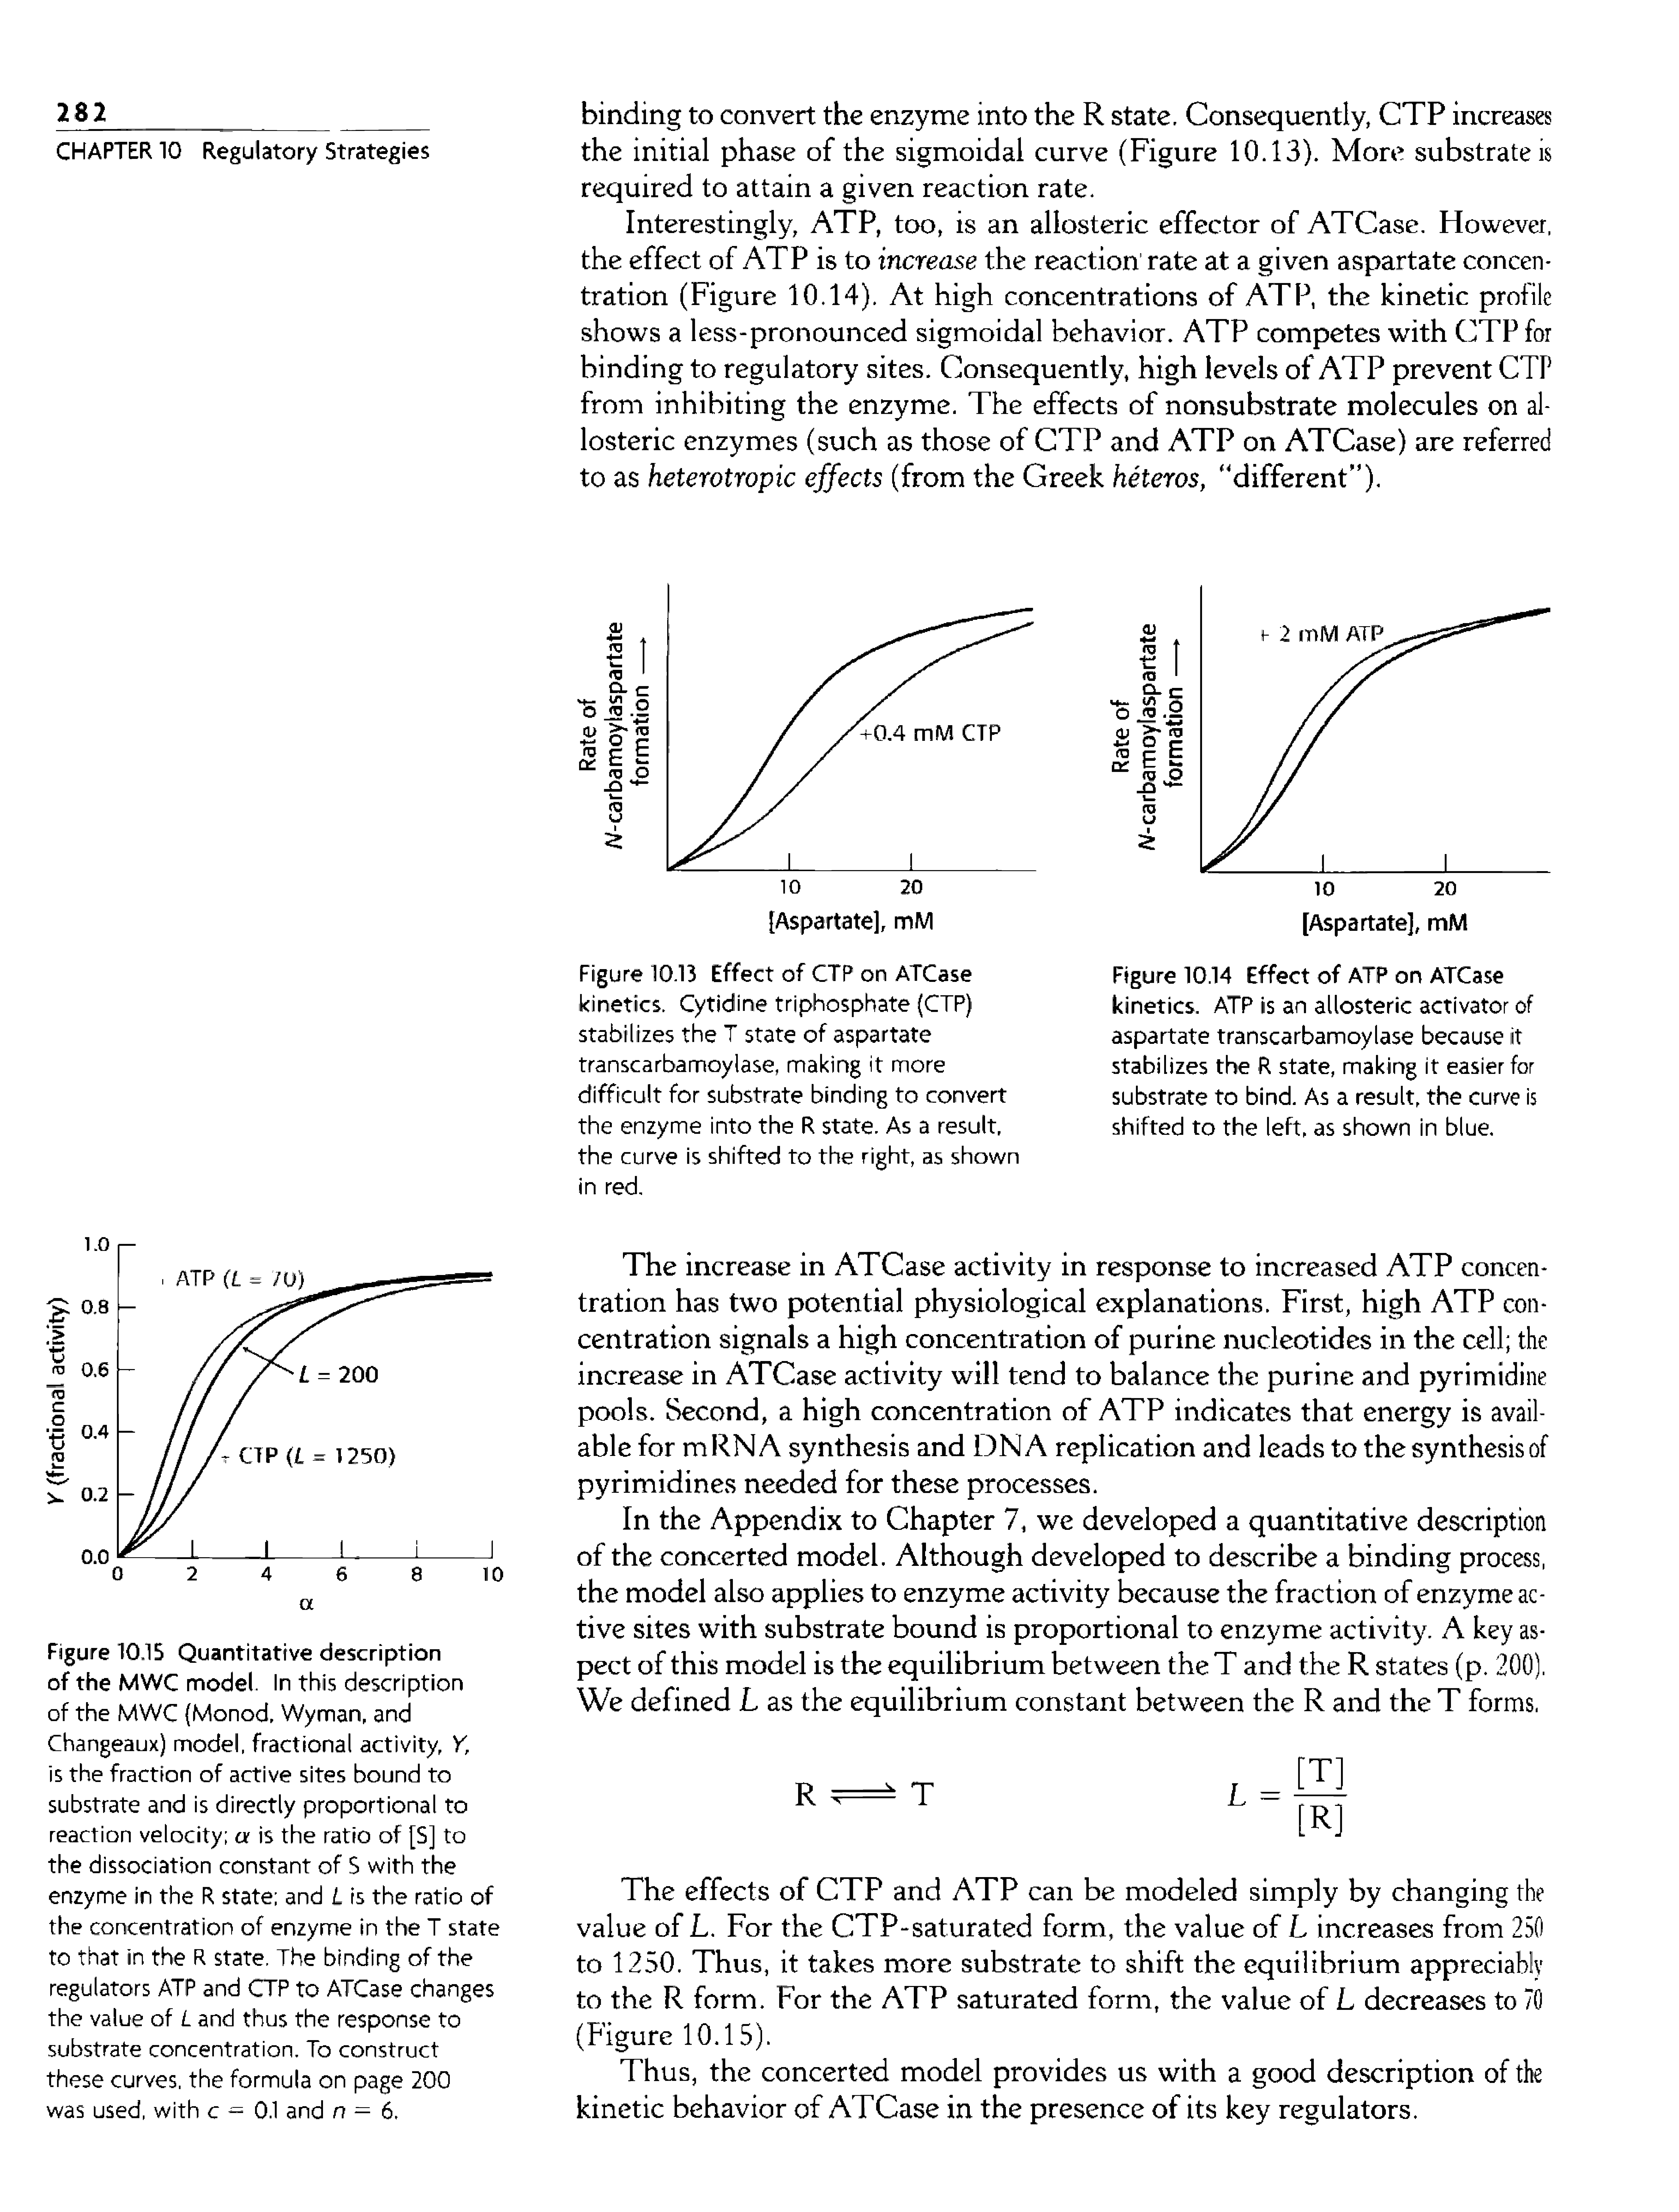 Figure 10.15 Quantitative description of the MWC model. In this description of the MWC Monod, Wyman, and Changeaux) model, fractional activity, K is the fraction of active sites bound to substrate and is directly proportional to reaction velocity a is the ratio of [S] to the dissociation constant of 5 with the enzyme in the R state and L Is the ratio of the concentration of enzyme in the T state to that in the R state, The binding of the regulators ATP and CTP to ATCase changes the value of L and thus the response to substrate concentration. To construct these curves, the formula on page 200 was used, with c = 0.1 and n — 6.